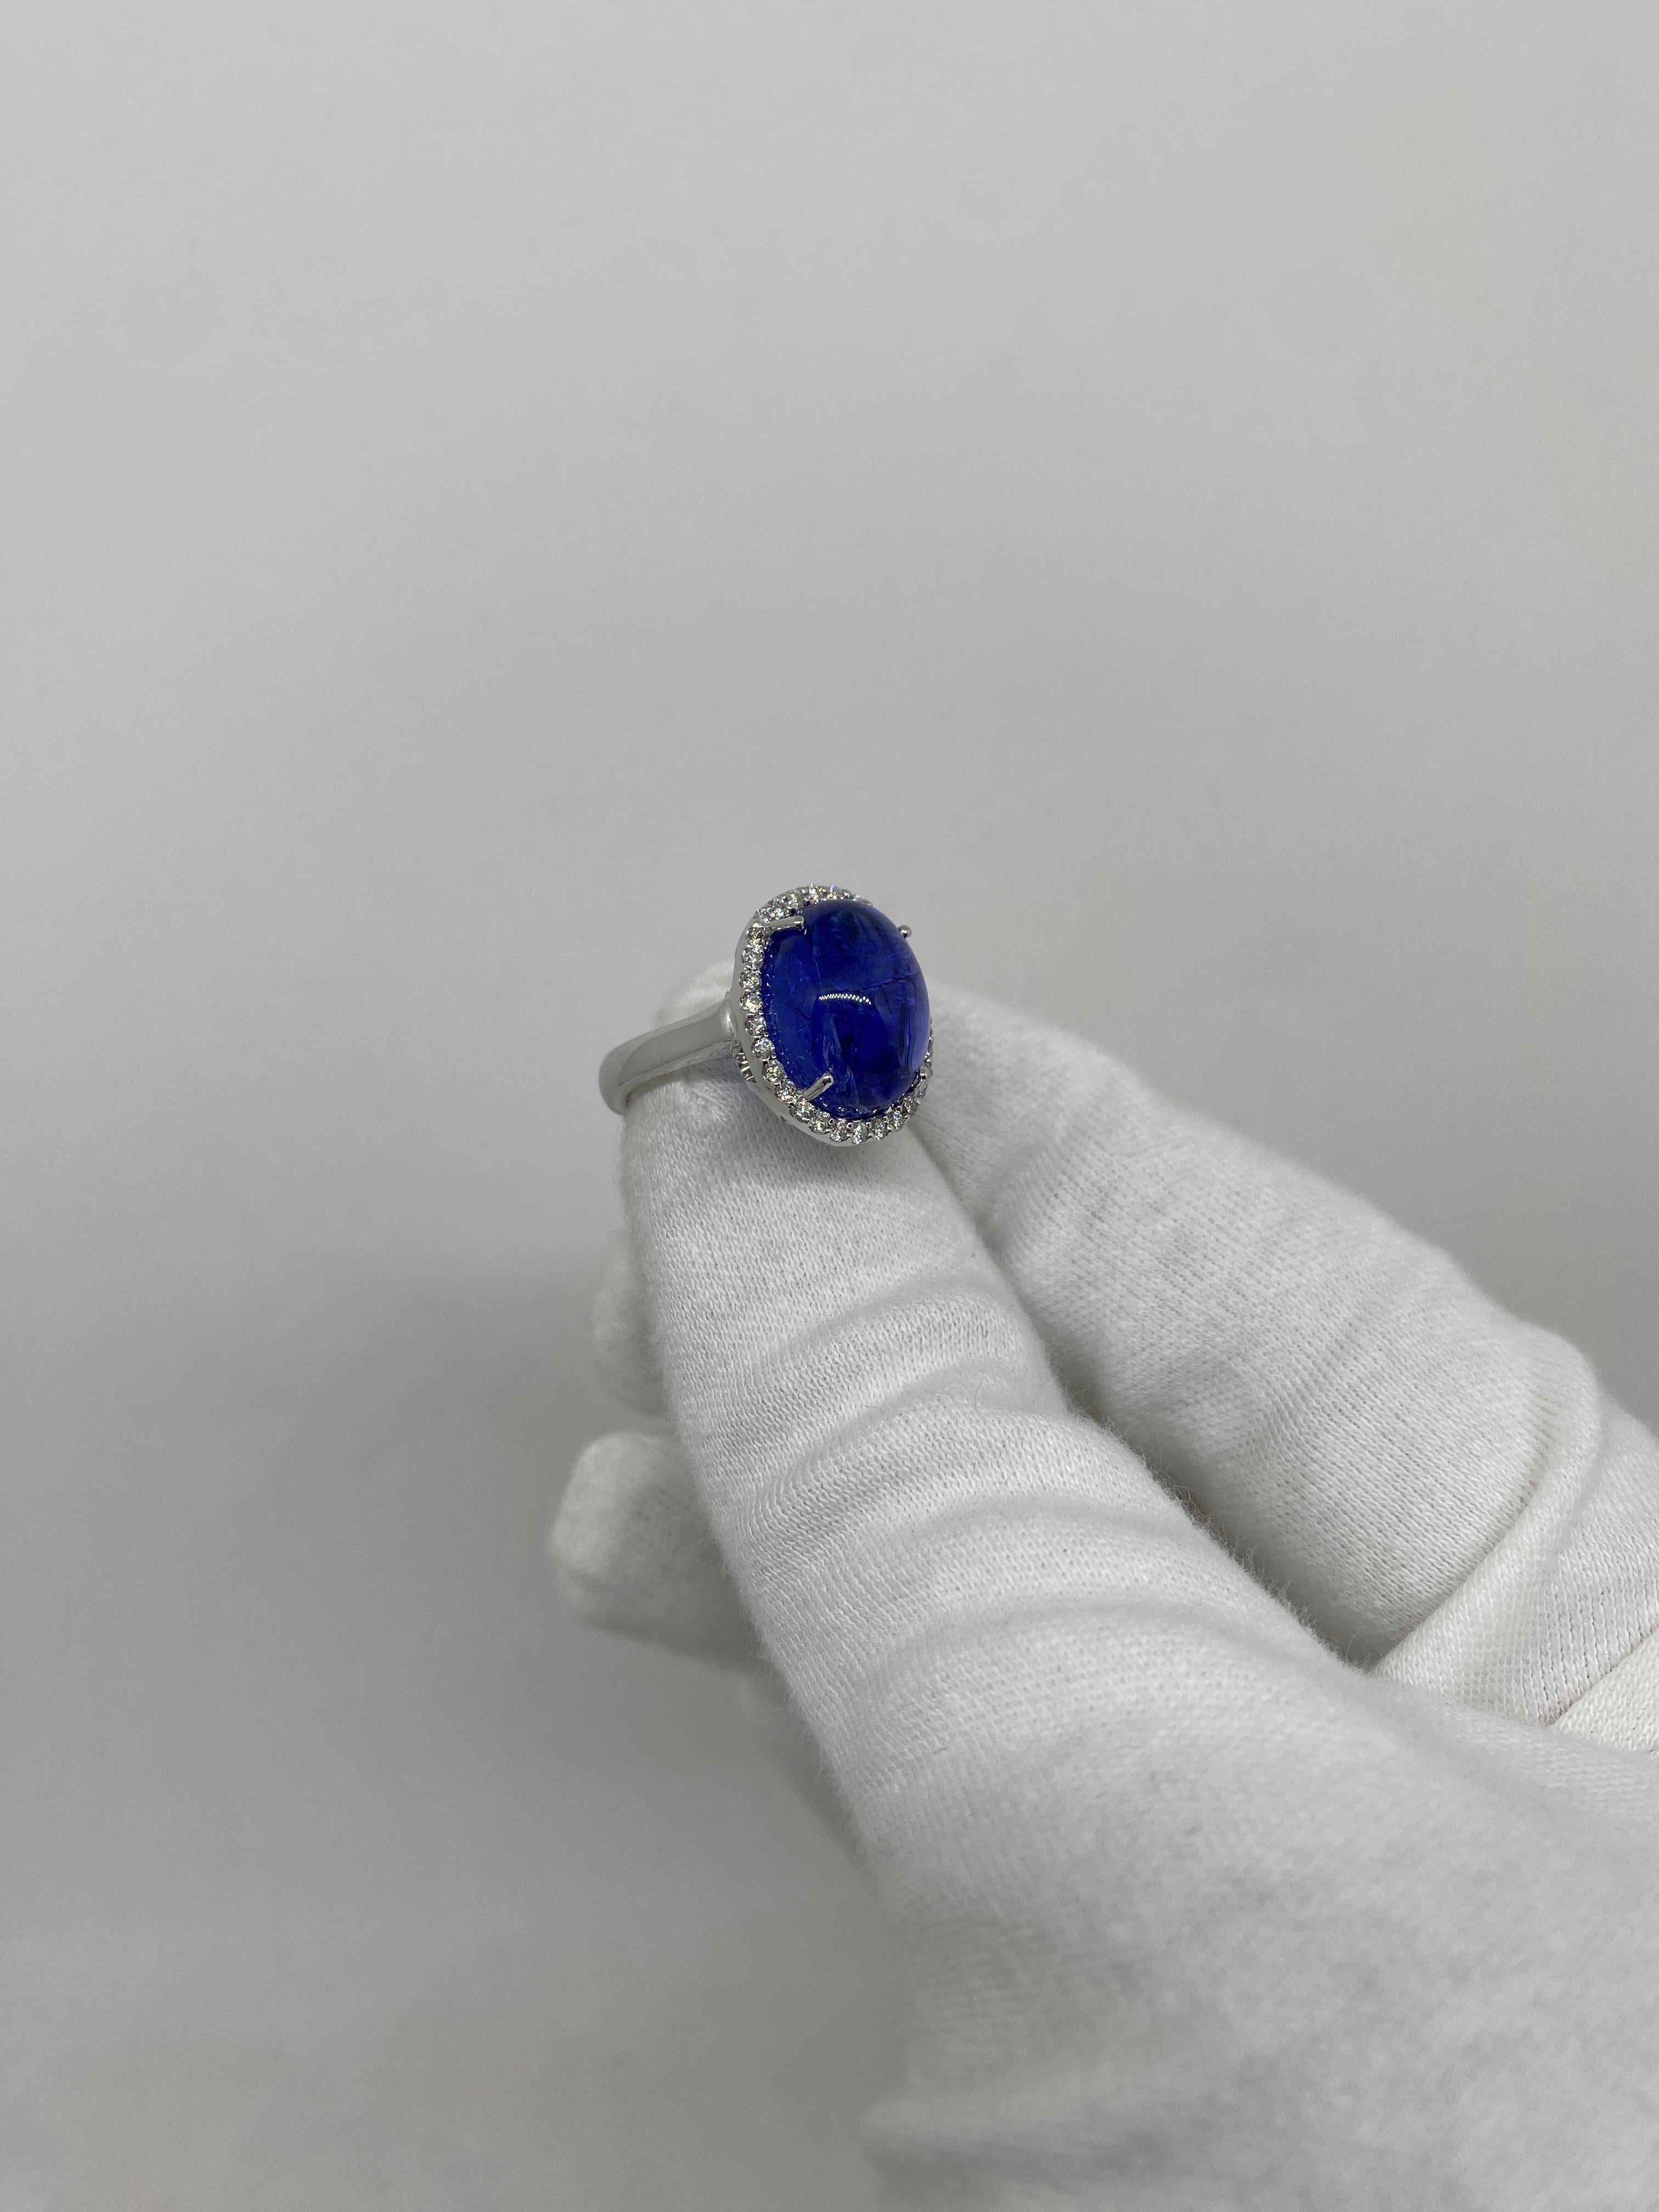 18 kt white gold ring with cabochon-cut tanzanite ct 10.43 surrounded by white natural diamonds totaling ct 0.35

Welcome to our jewelry collection, where every piece tells a story of timeless elegance and unparalleled craftsmanship. As a family-run